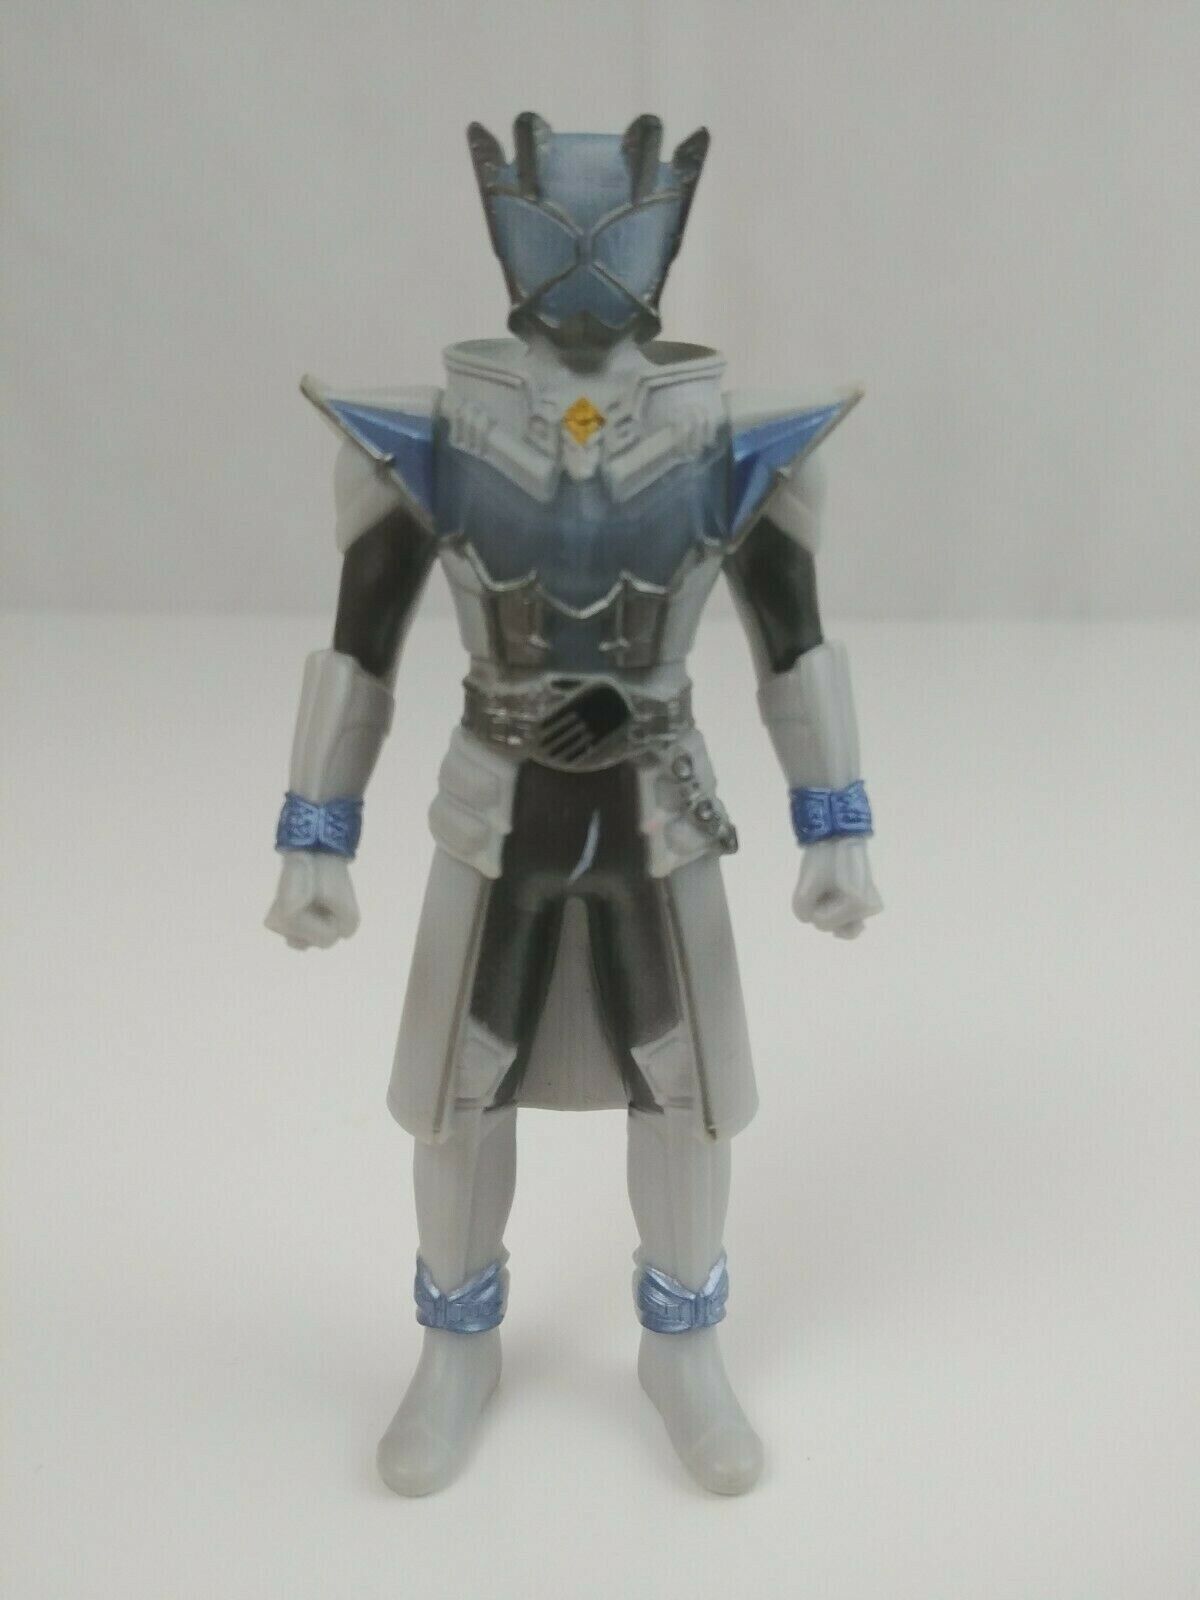 Primary image for Bandai Masked Kamen Rider Wizad Infinity Style Action Figure 4.5"